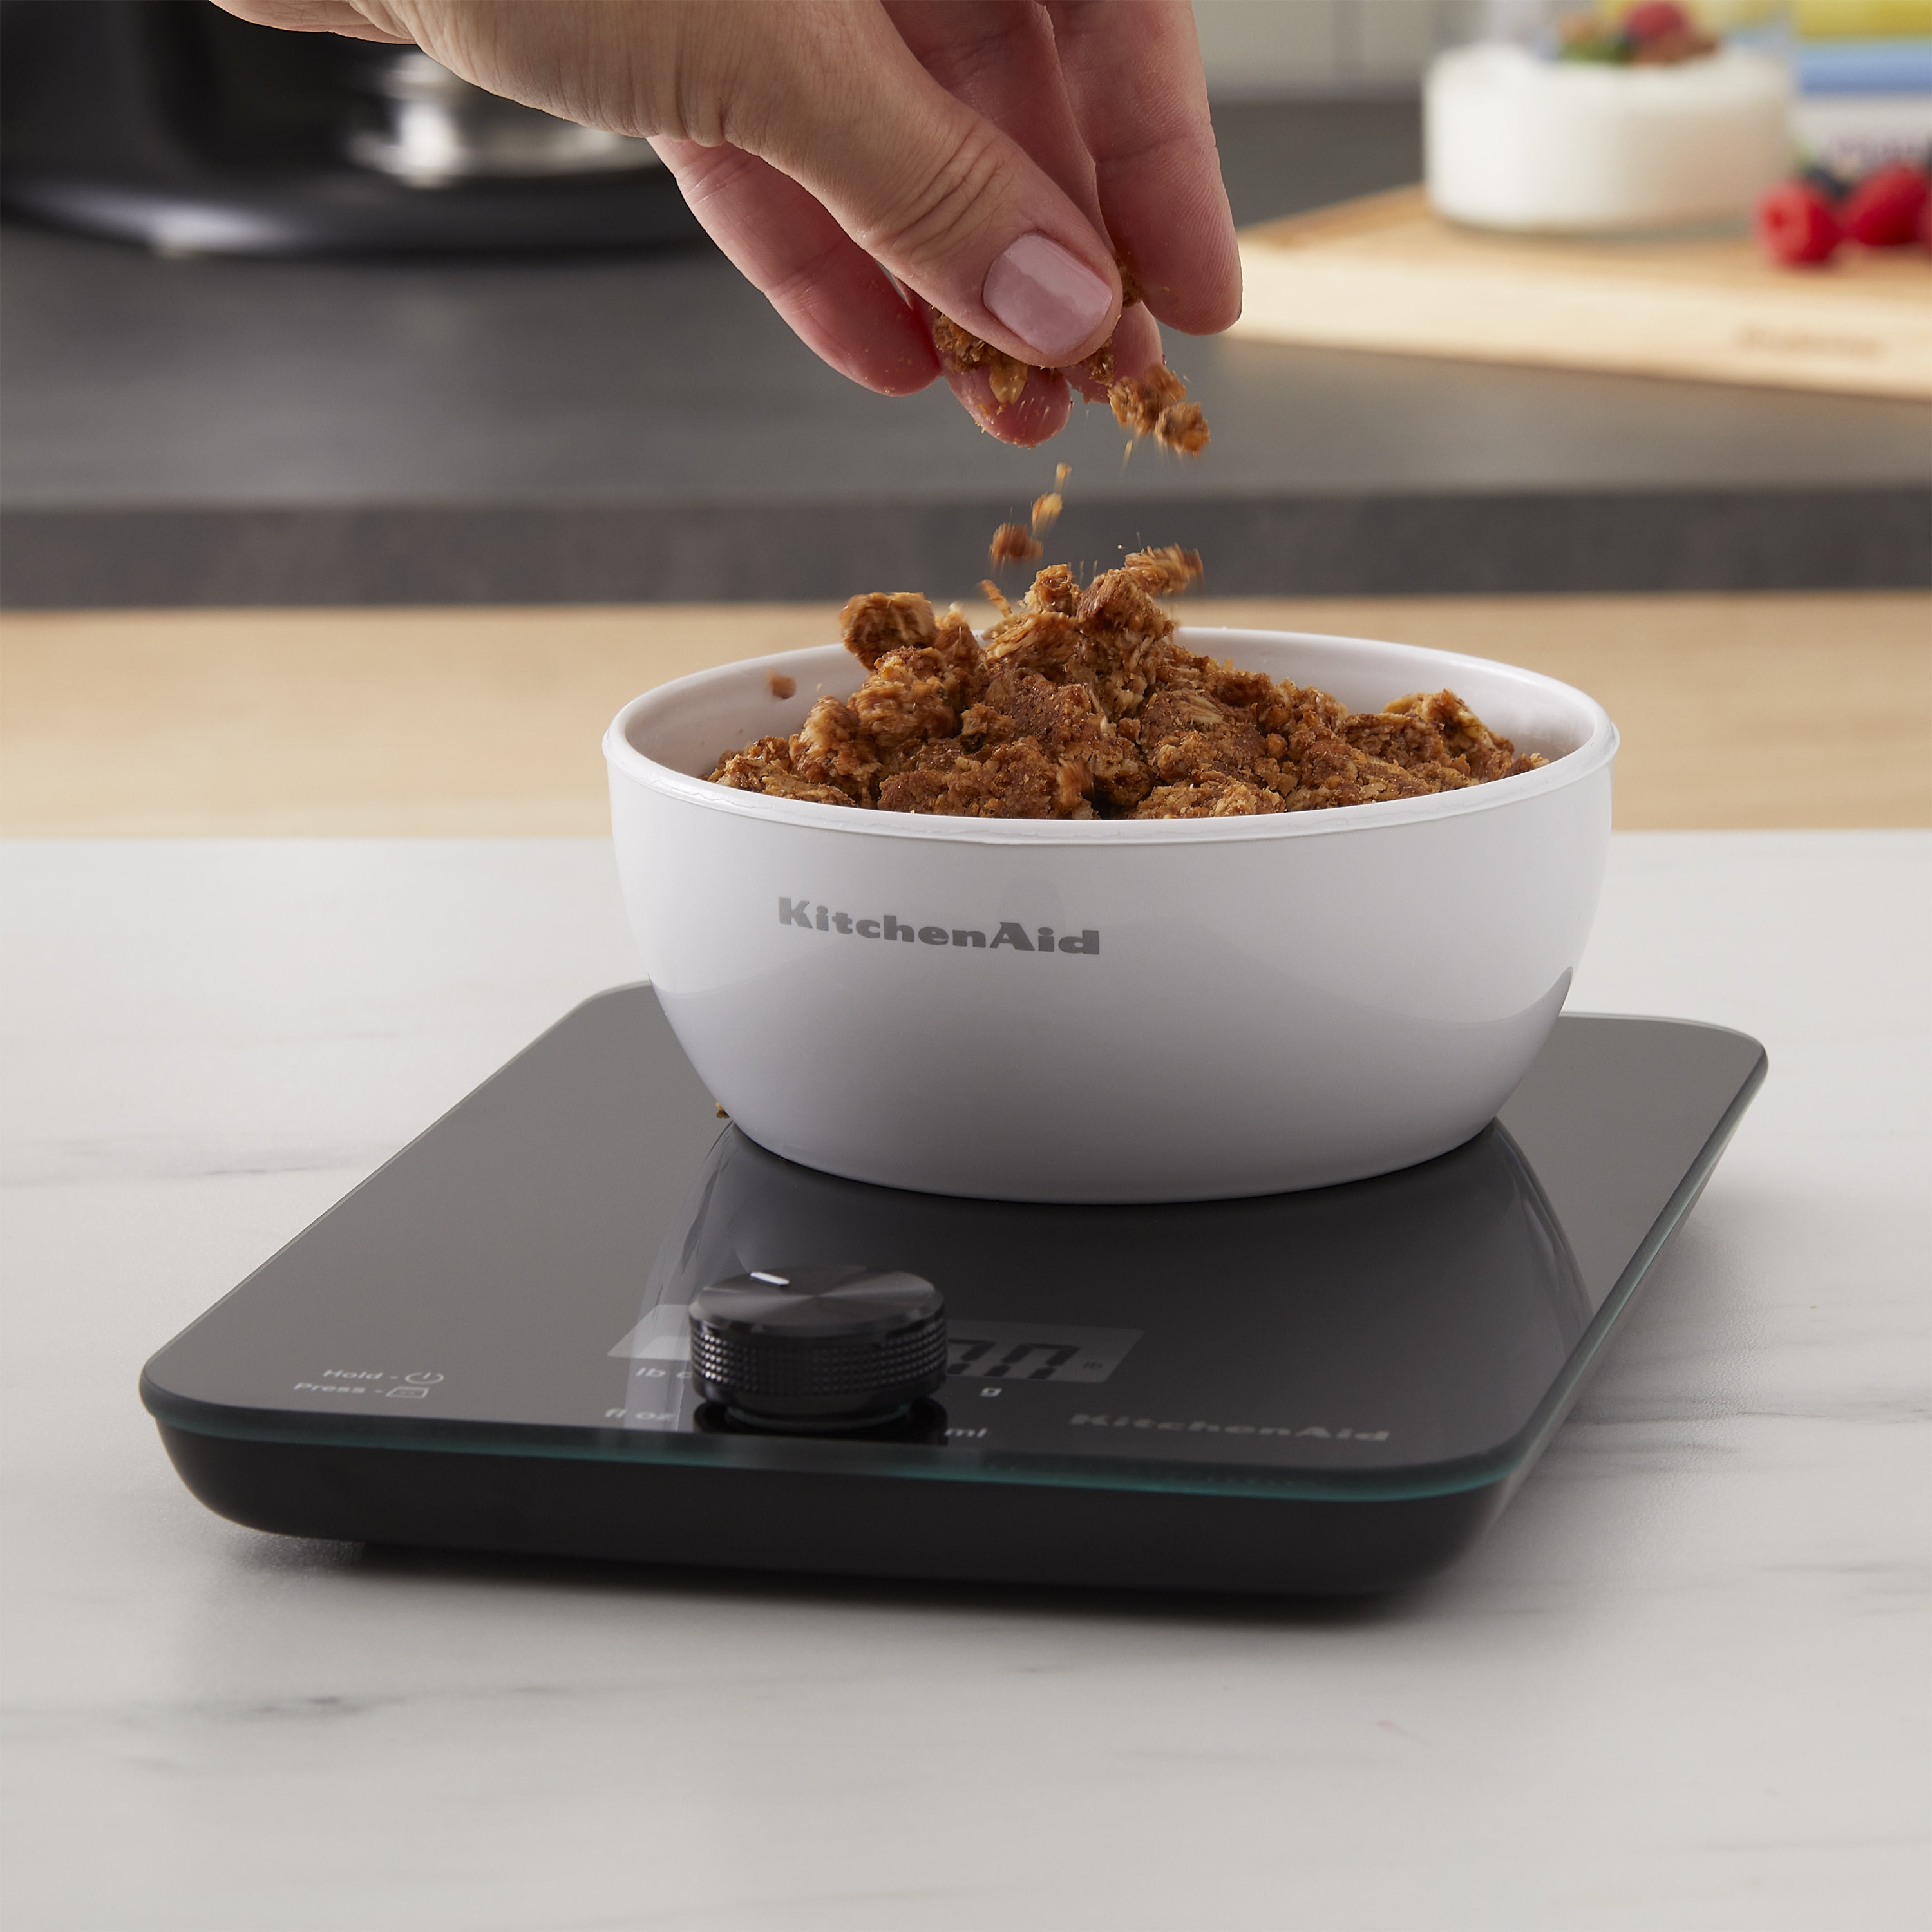 KitchenAid Gourmet Stainless Steel Electronic Scale - Bed Bath